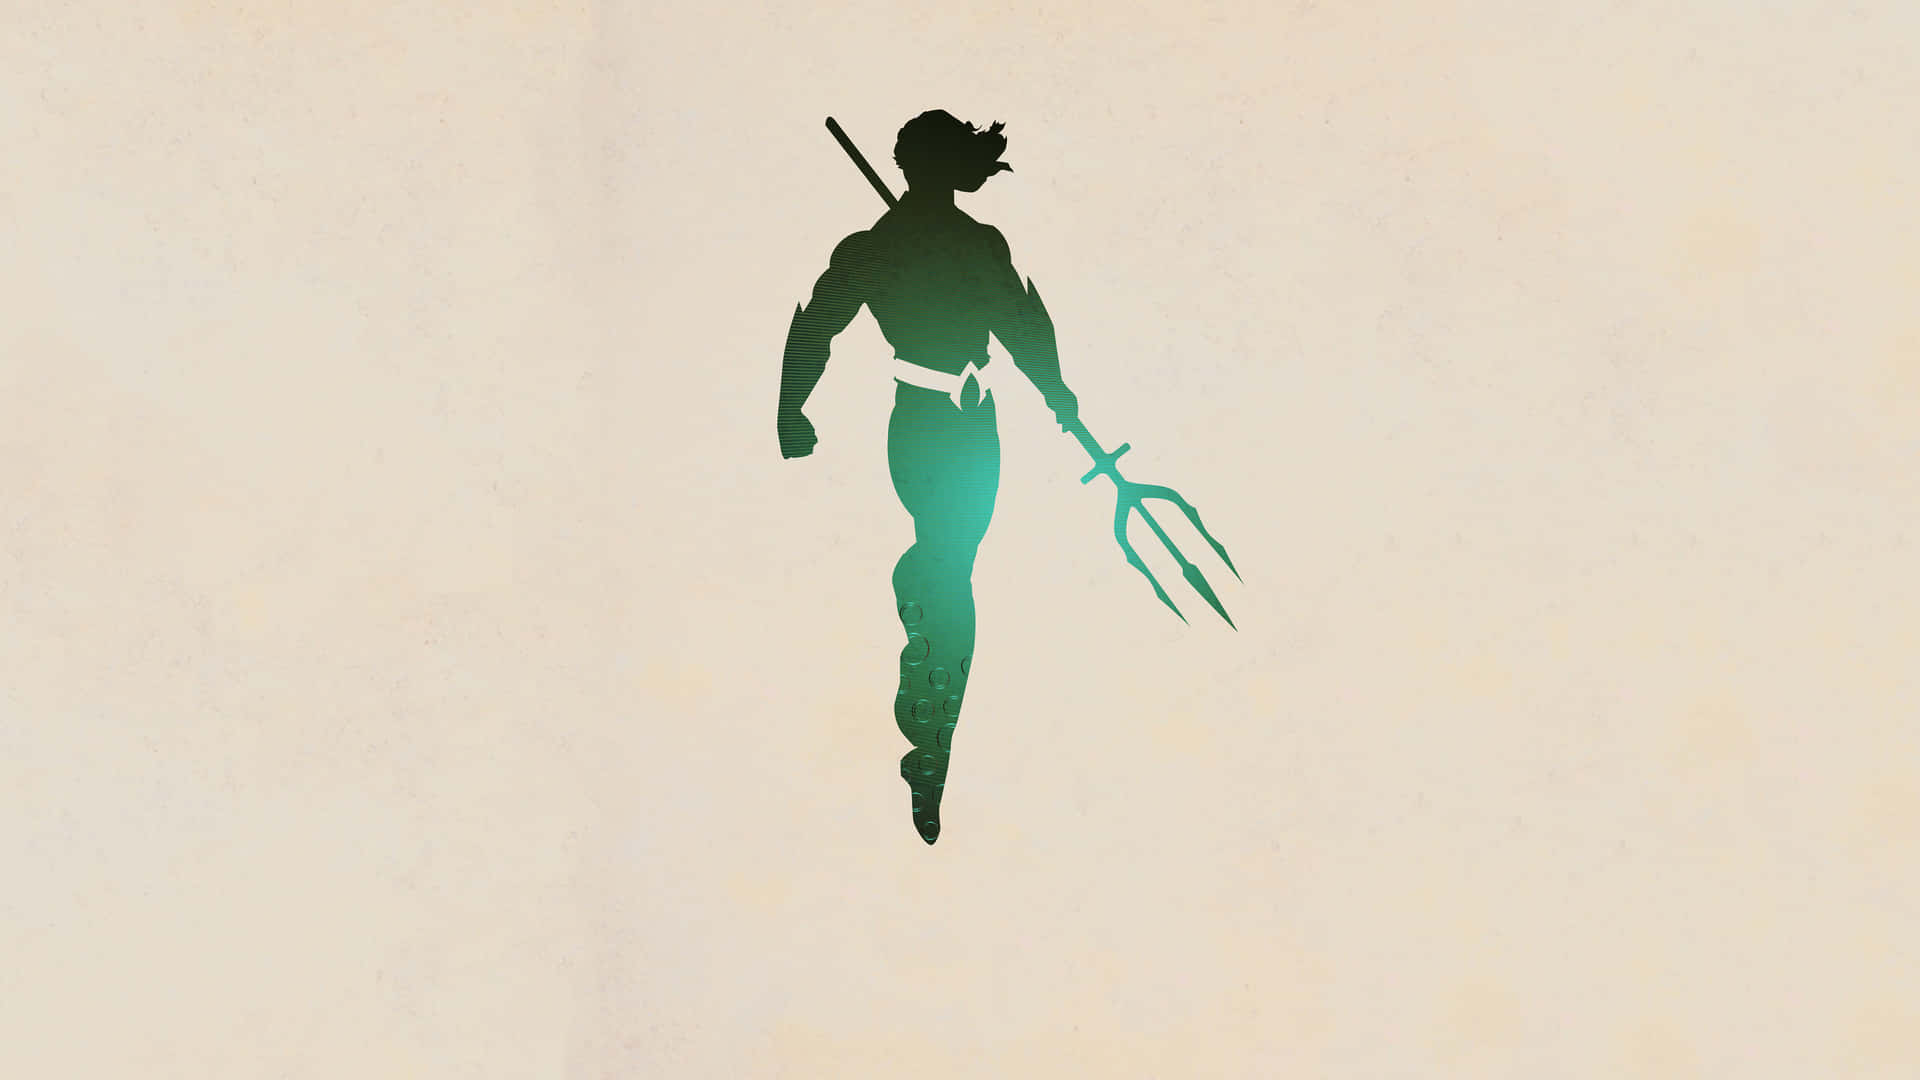 A Silhouette Of A Man Holding A Spear